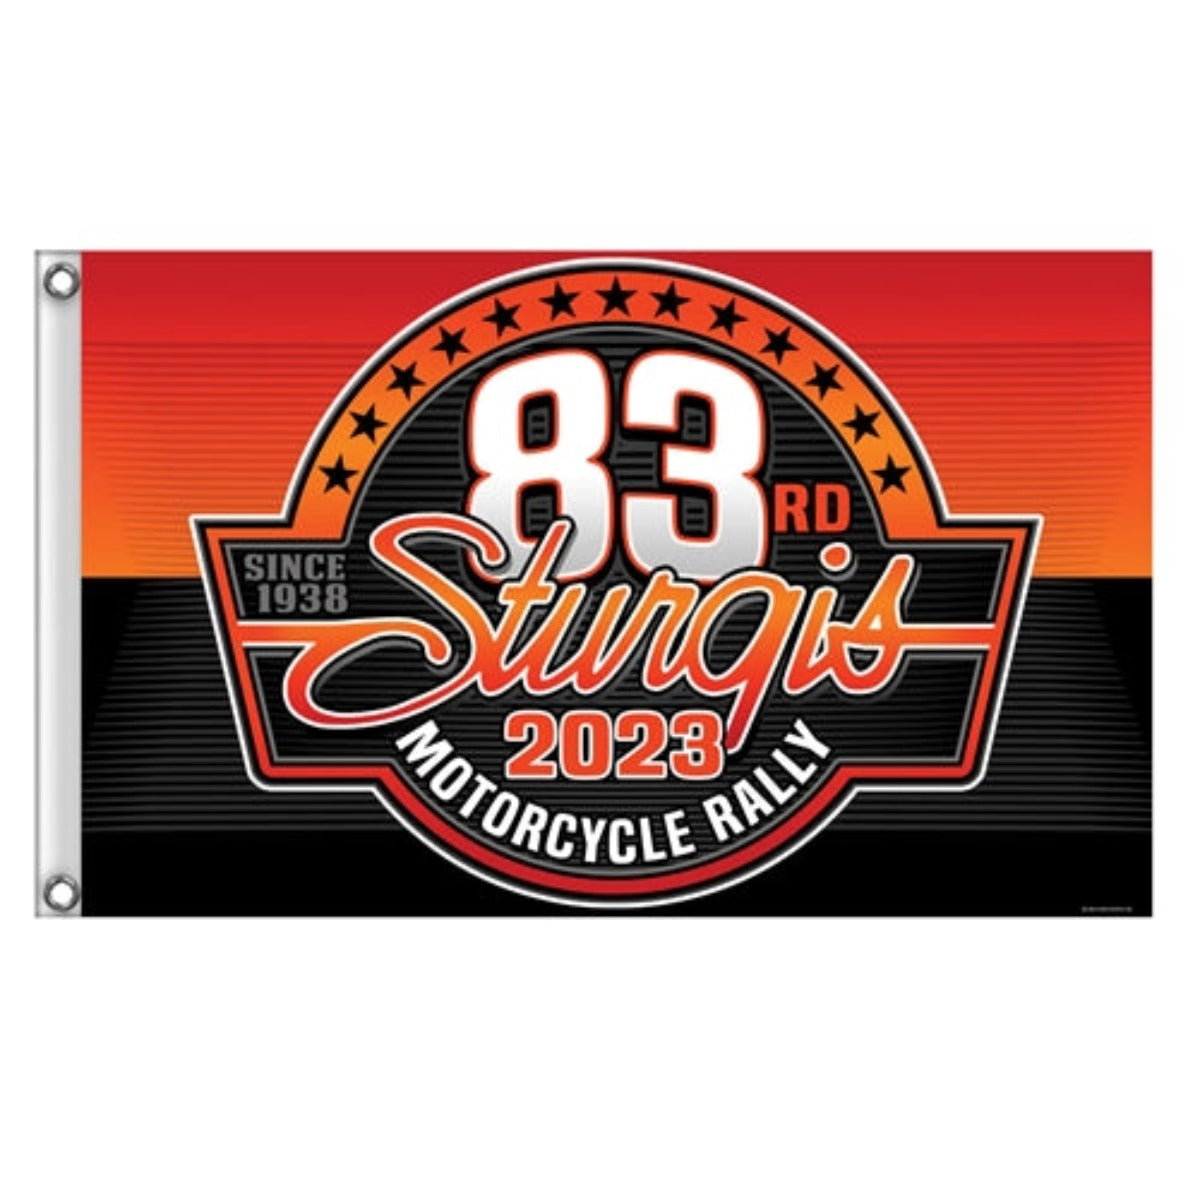 Hot Leathers Sturgis Motorcycle Rally Logo Flag 2023